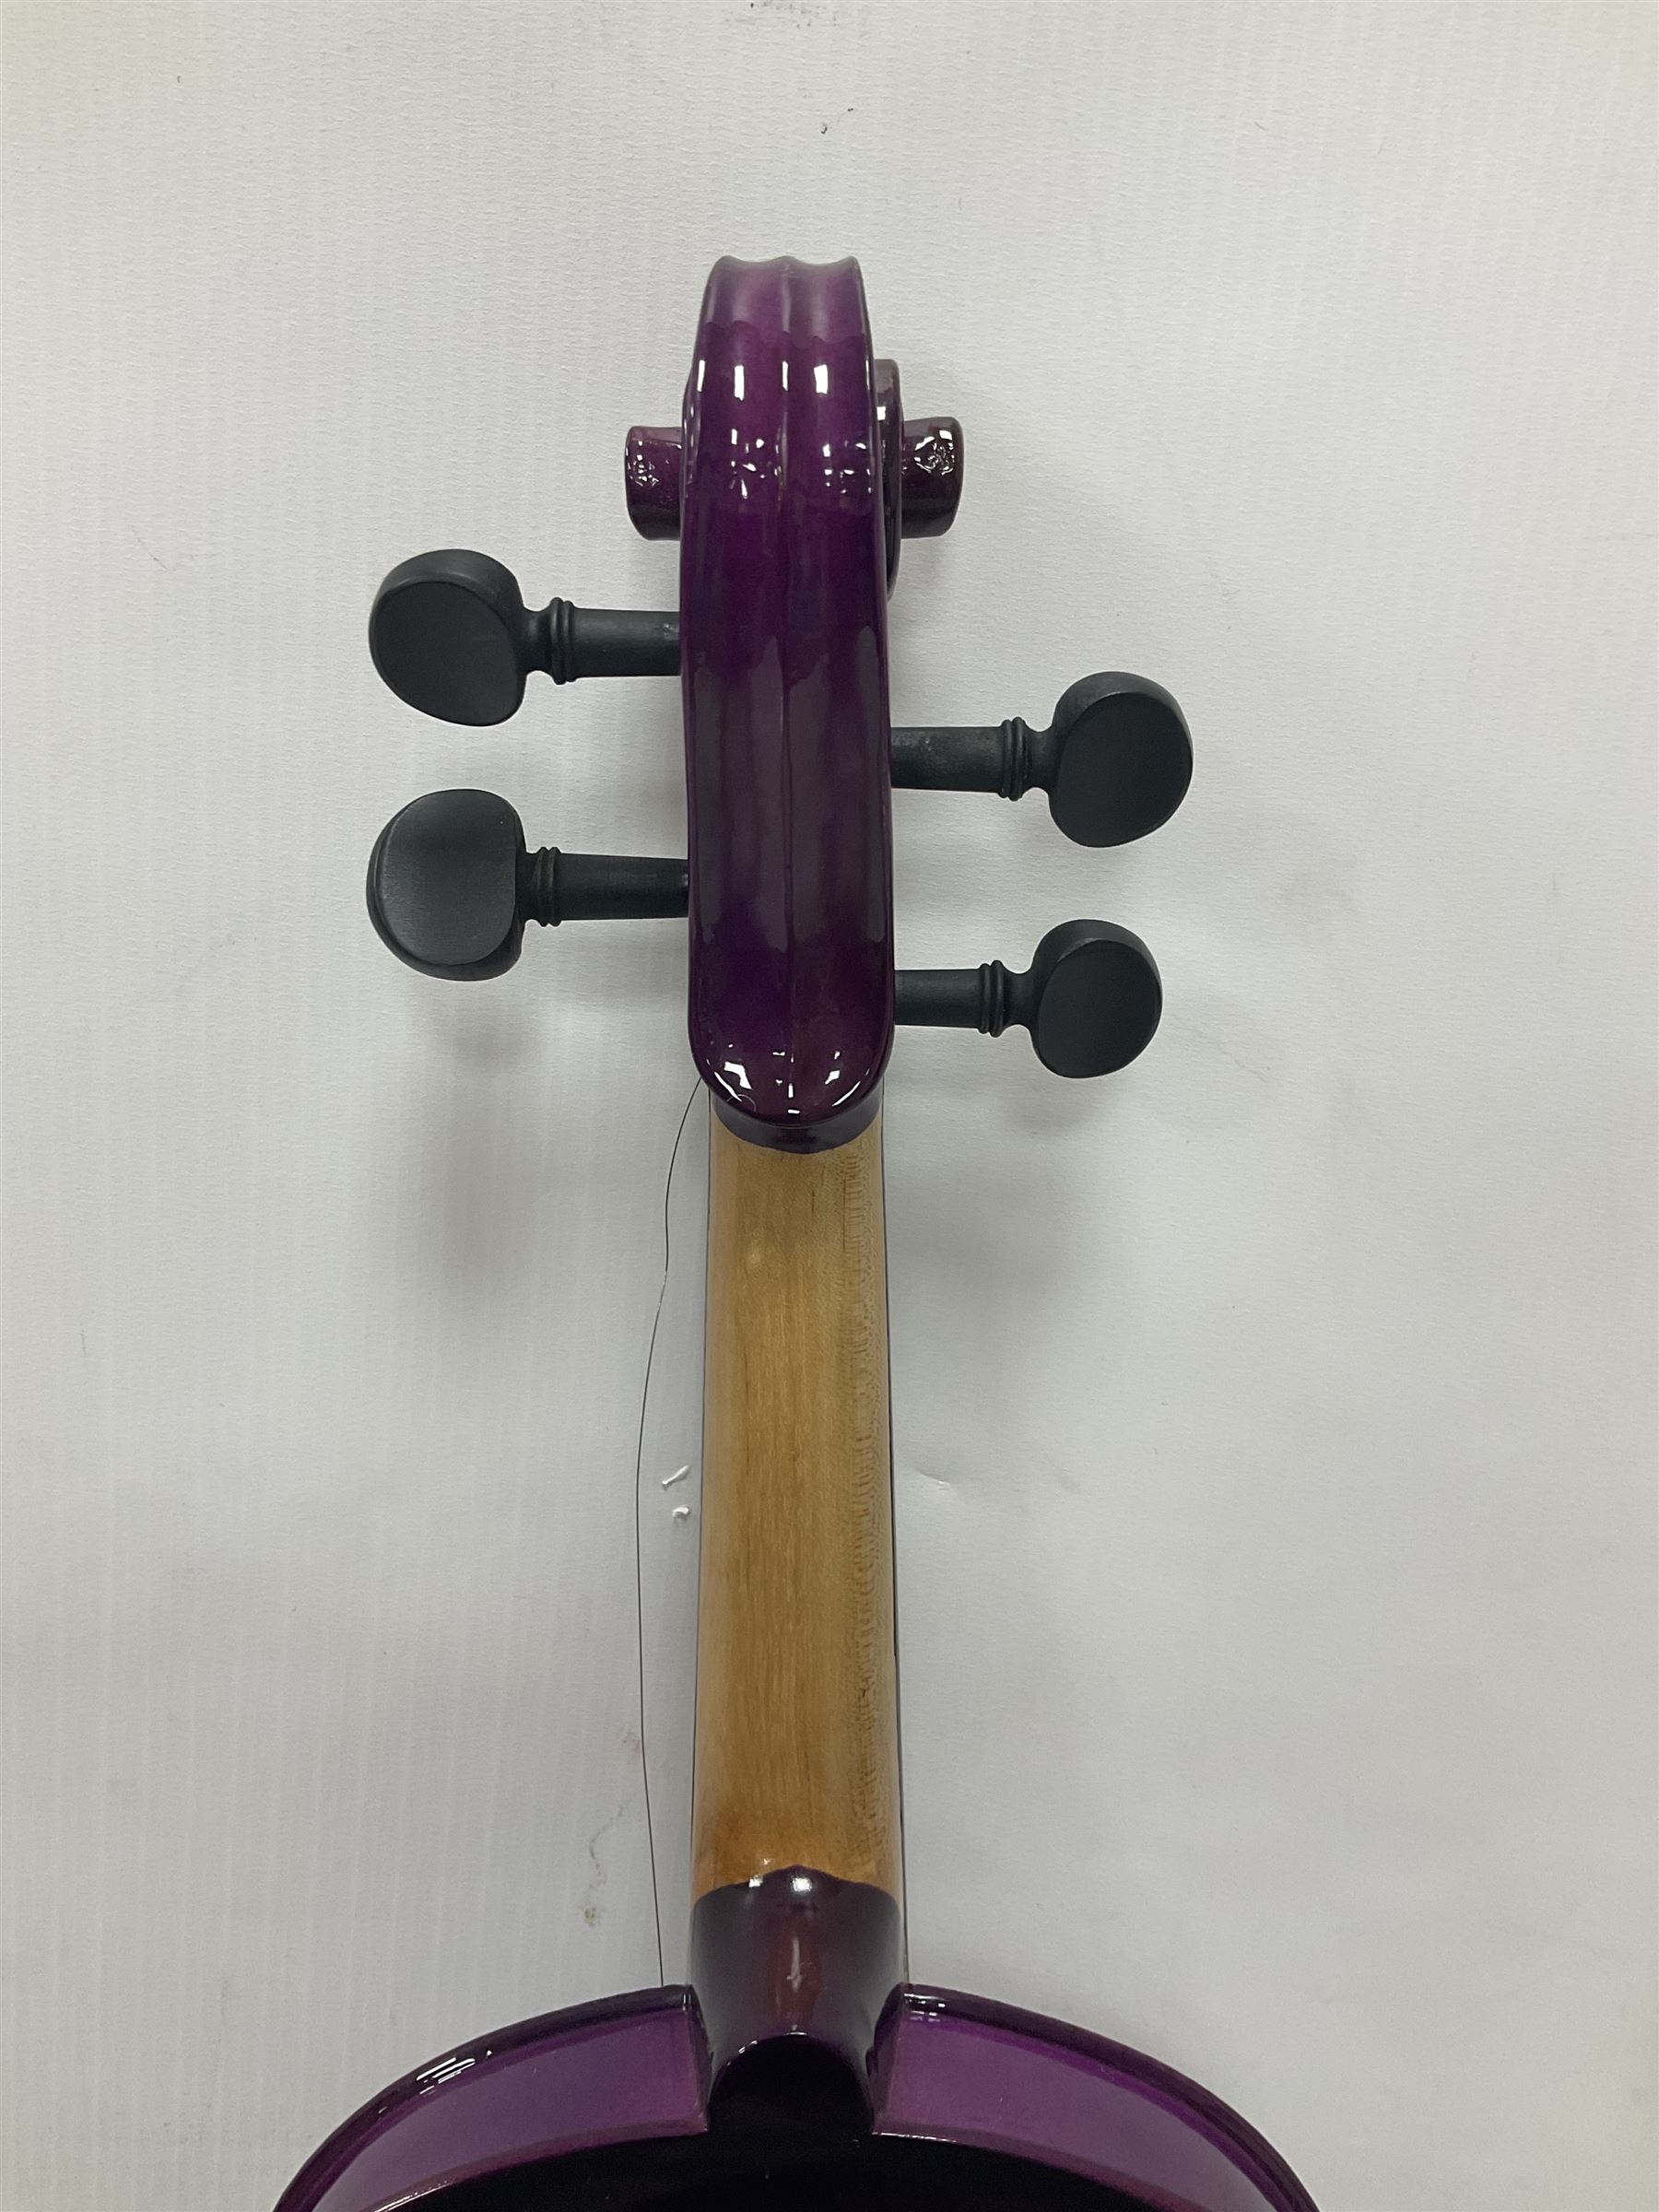 Intermusic 3/4 violin with a violet coloured solid wood body - Image 13 of 25